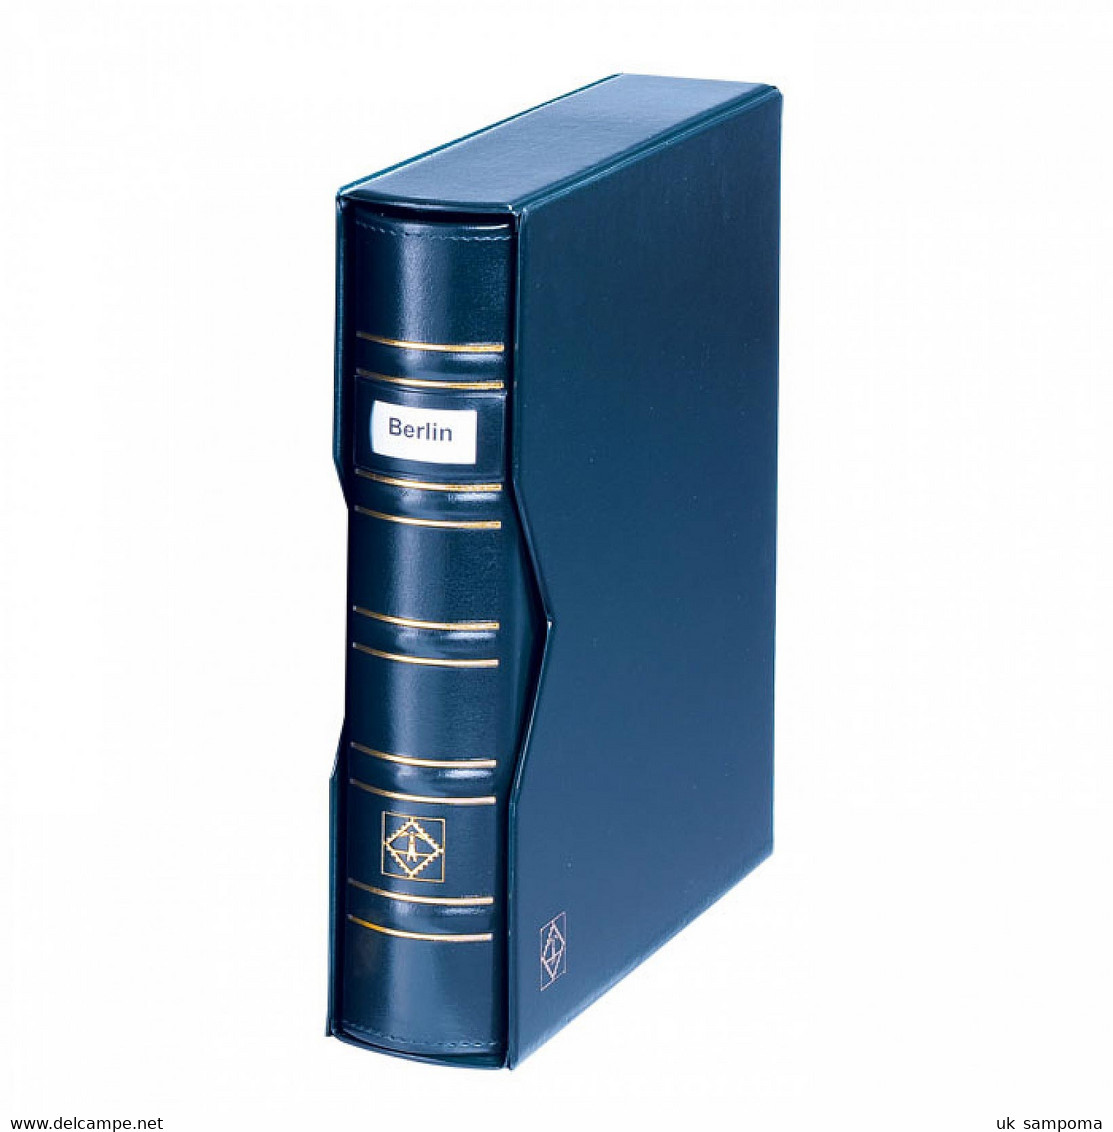 Ringbinder OPTIMA, Classic Design SIGNUM, With Labeling Field, Incl. Slipcase, Blue - Large Format, Black Pages